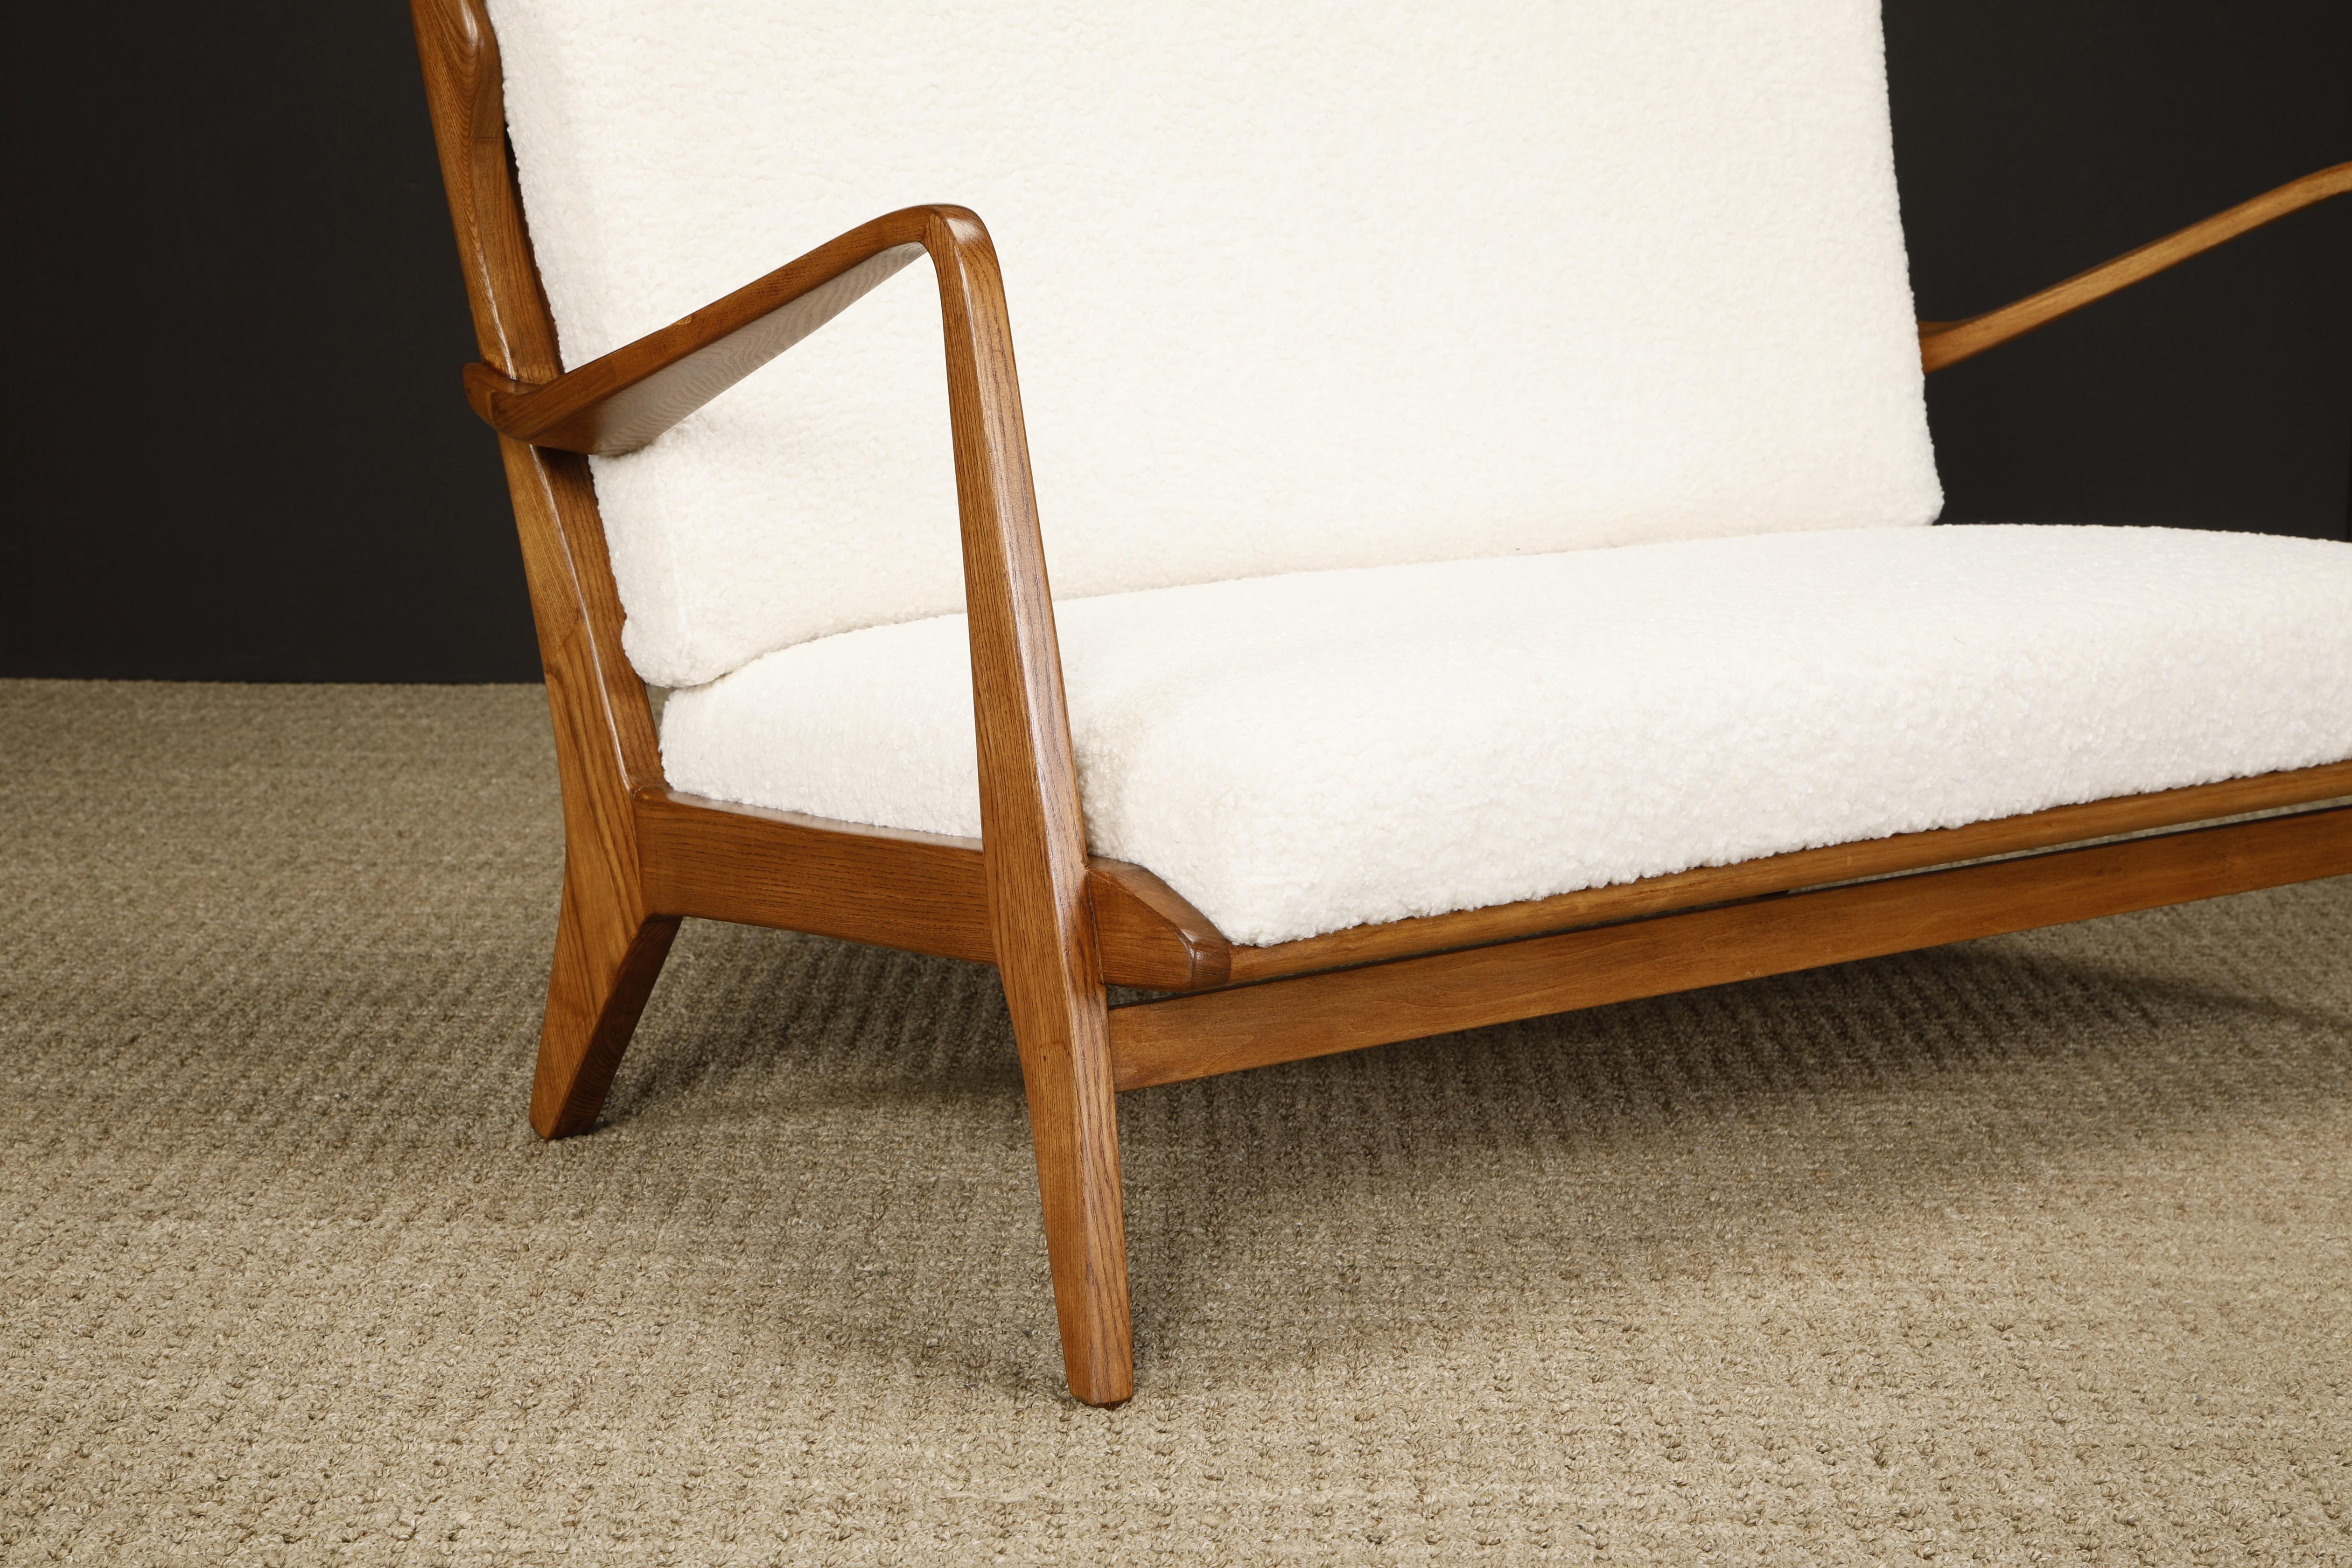 Bouclé Rare Settee by Gio Ponti for Cassina, Refinished and Reupholstered, Italy 1950s For Sale